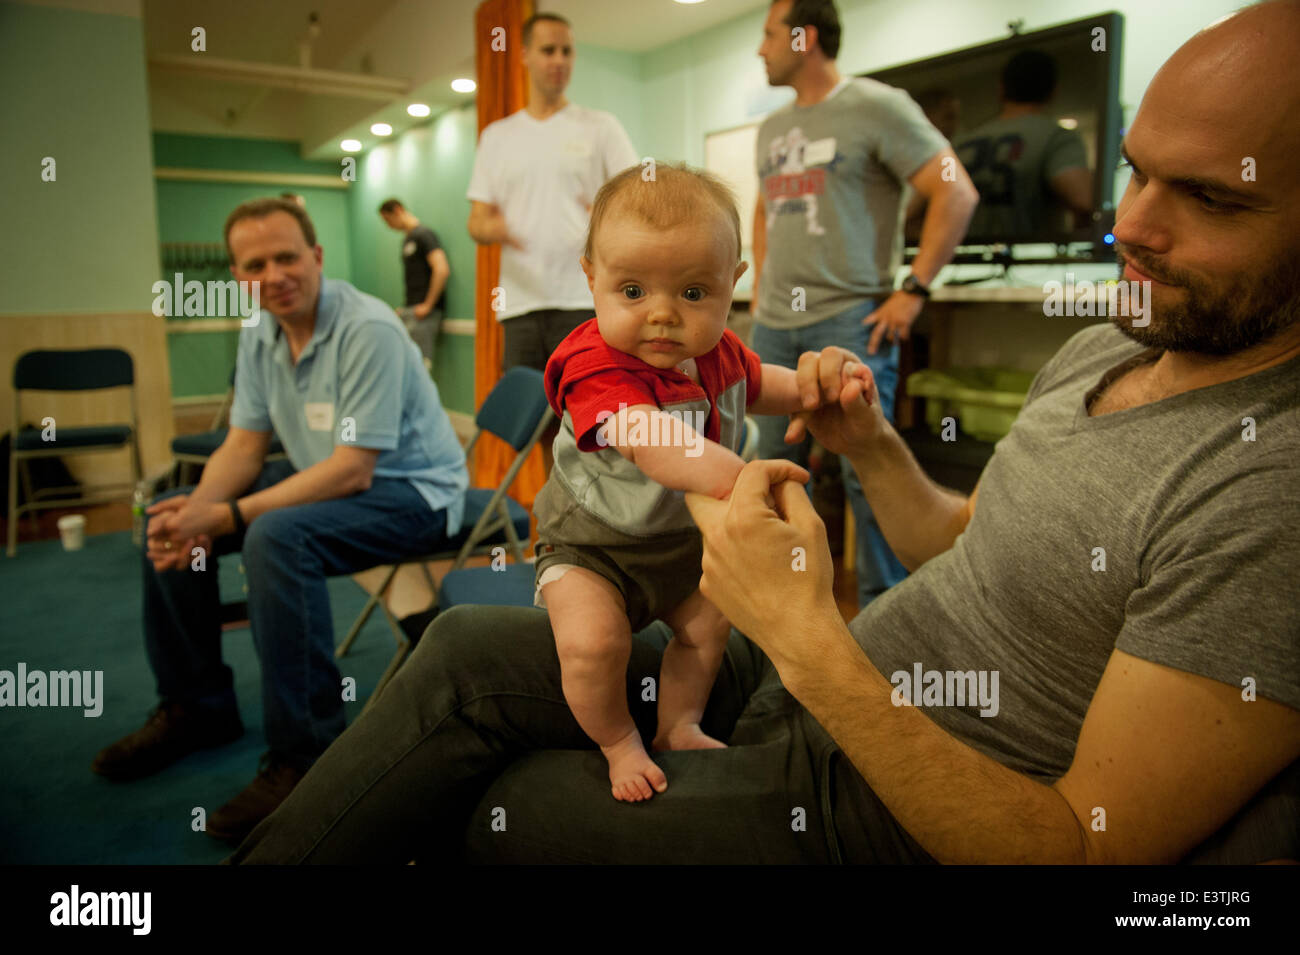 Manhattan, New York, USA. 21st June, 2014. David Franzson, 36 of Tribeca, holds his 13-week old daughter Isold as expectant dads including Larry Hausman (left), 42, of Holbrook, Evan Parker-Stephen (center), 35 of the Upper West Side and Rocco Rotondi (right), 36, of Floral Park look on as they learn about diaper changing, feeding and other issues from ''Daddy Boot Camp'' instructor Tim Mulvaney and other dads in Tribeca, Saturday June 21, 2014. © Bryan Smith/ZUMAPRESS.com/Alamy Live News Stock Photo